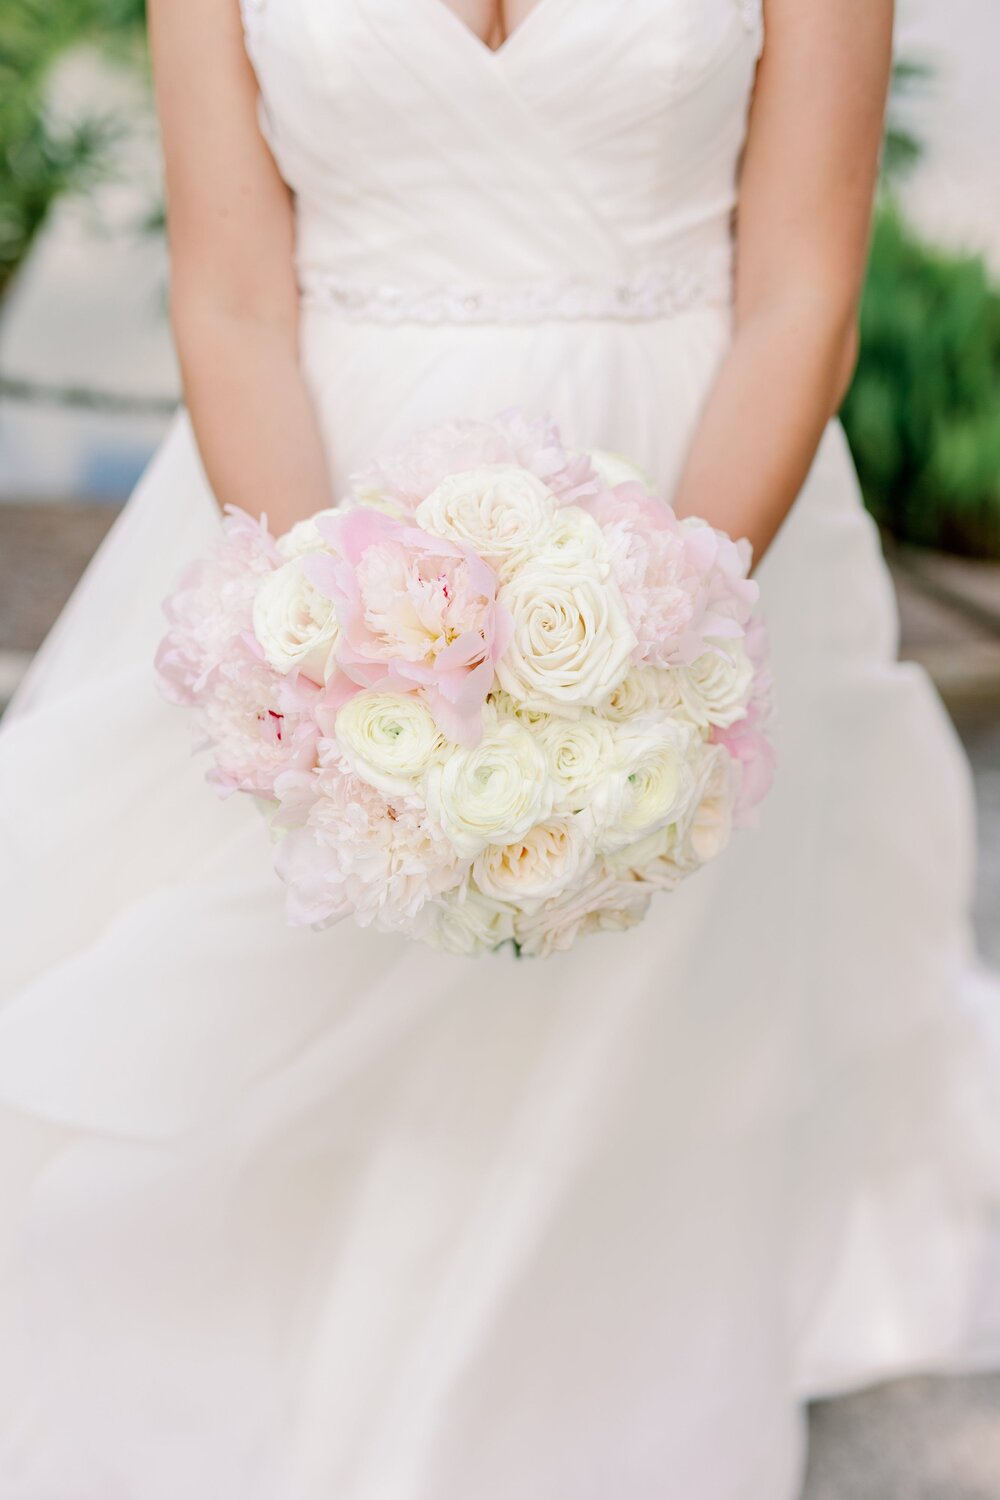 White and Pink Bridal Bouquet.jpeg